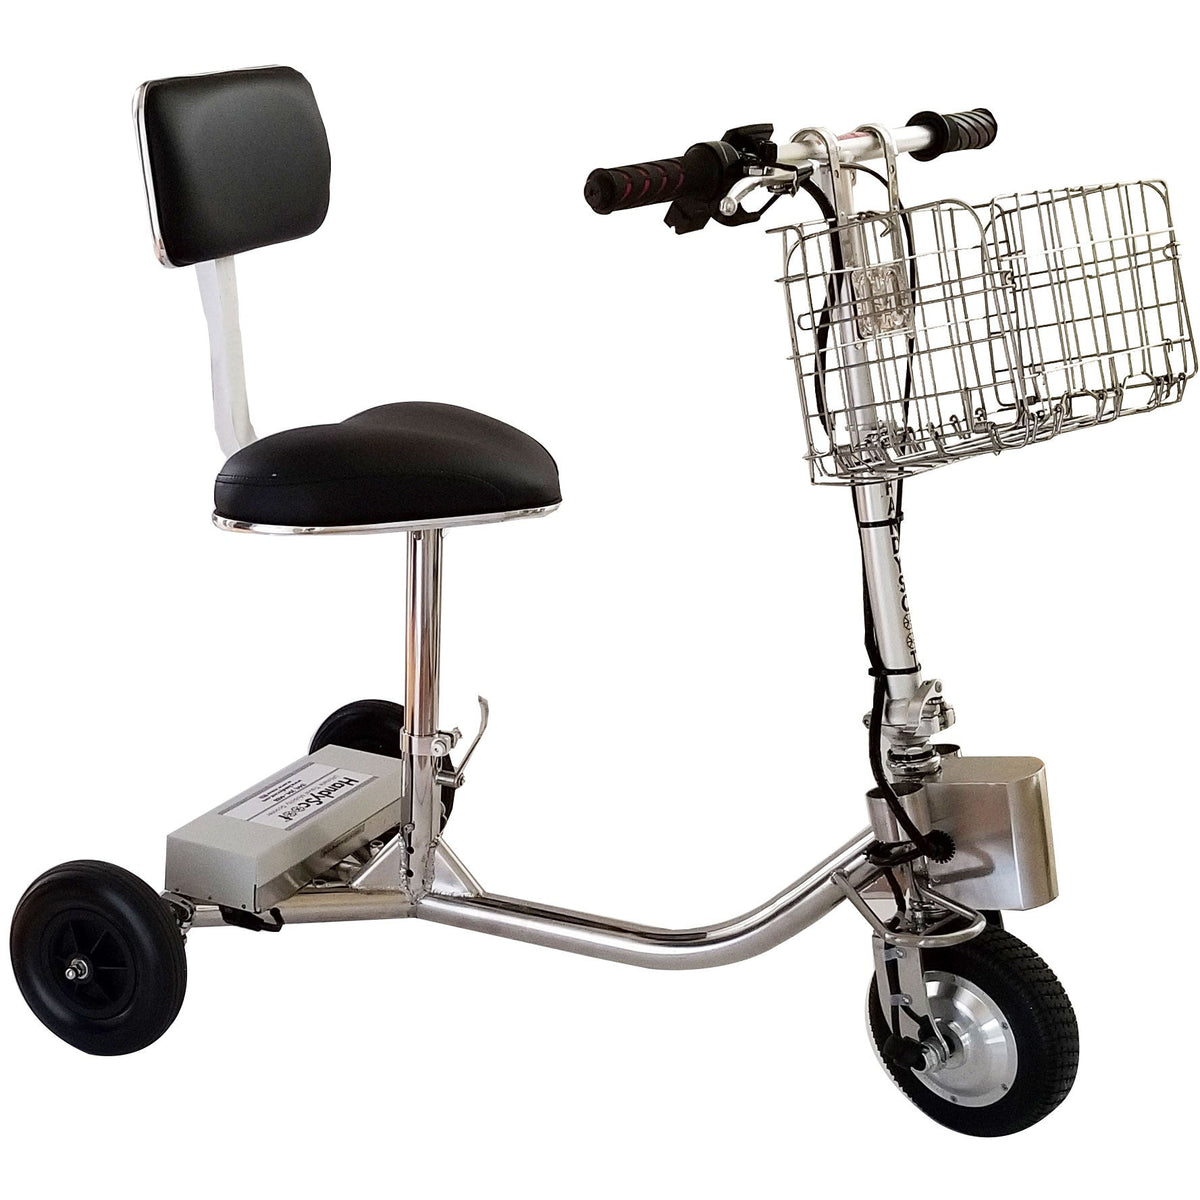 HandyScoot Folding 3 Wheel Travel Mobility Scooter